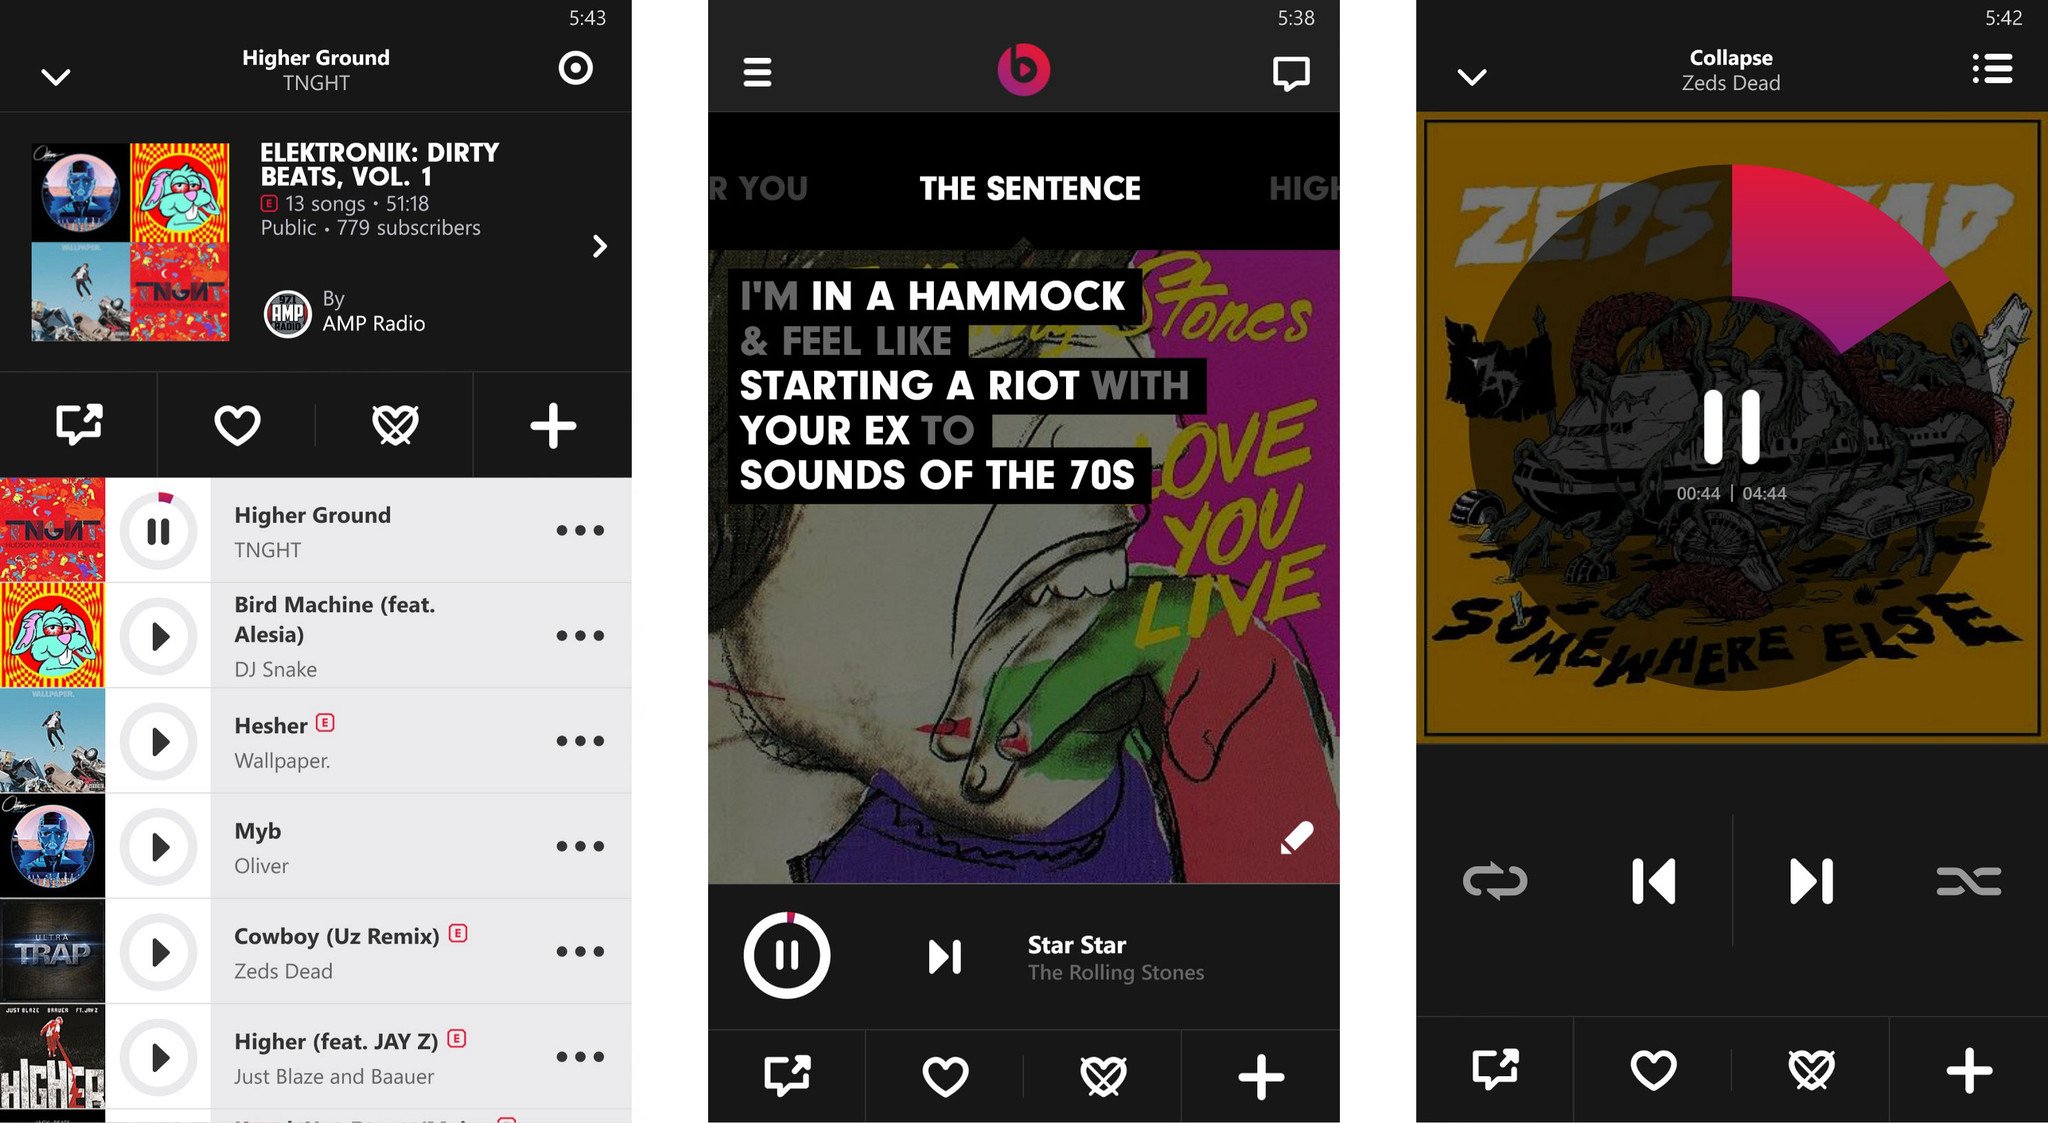 beats music player for pc